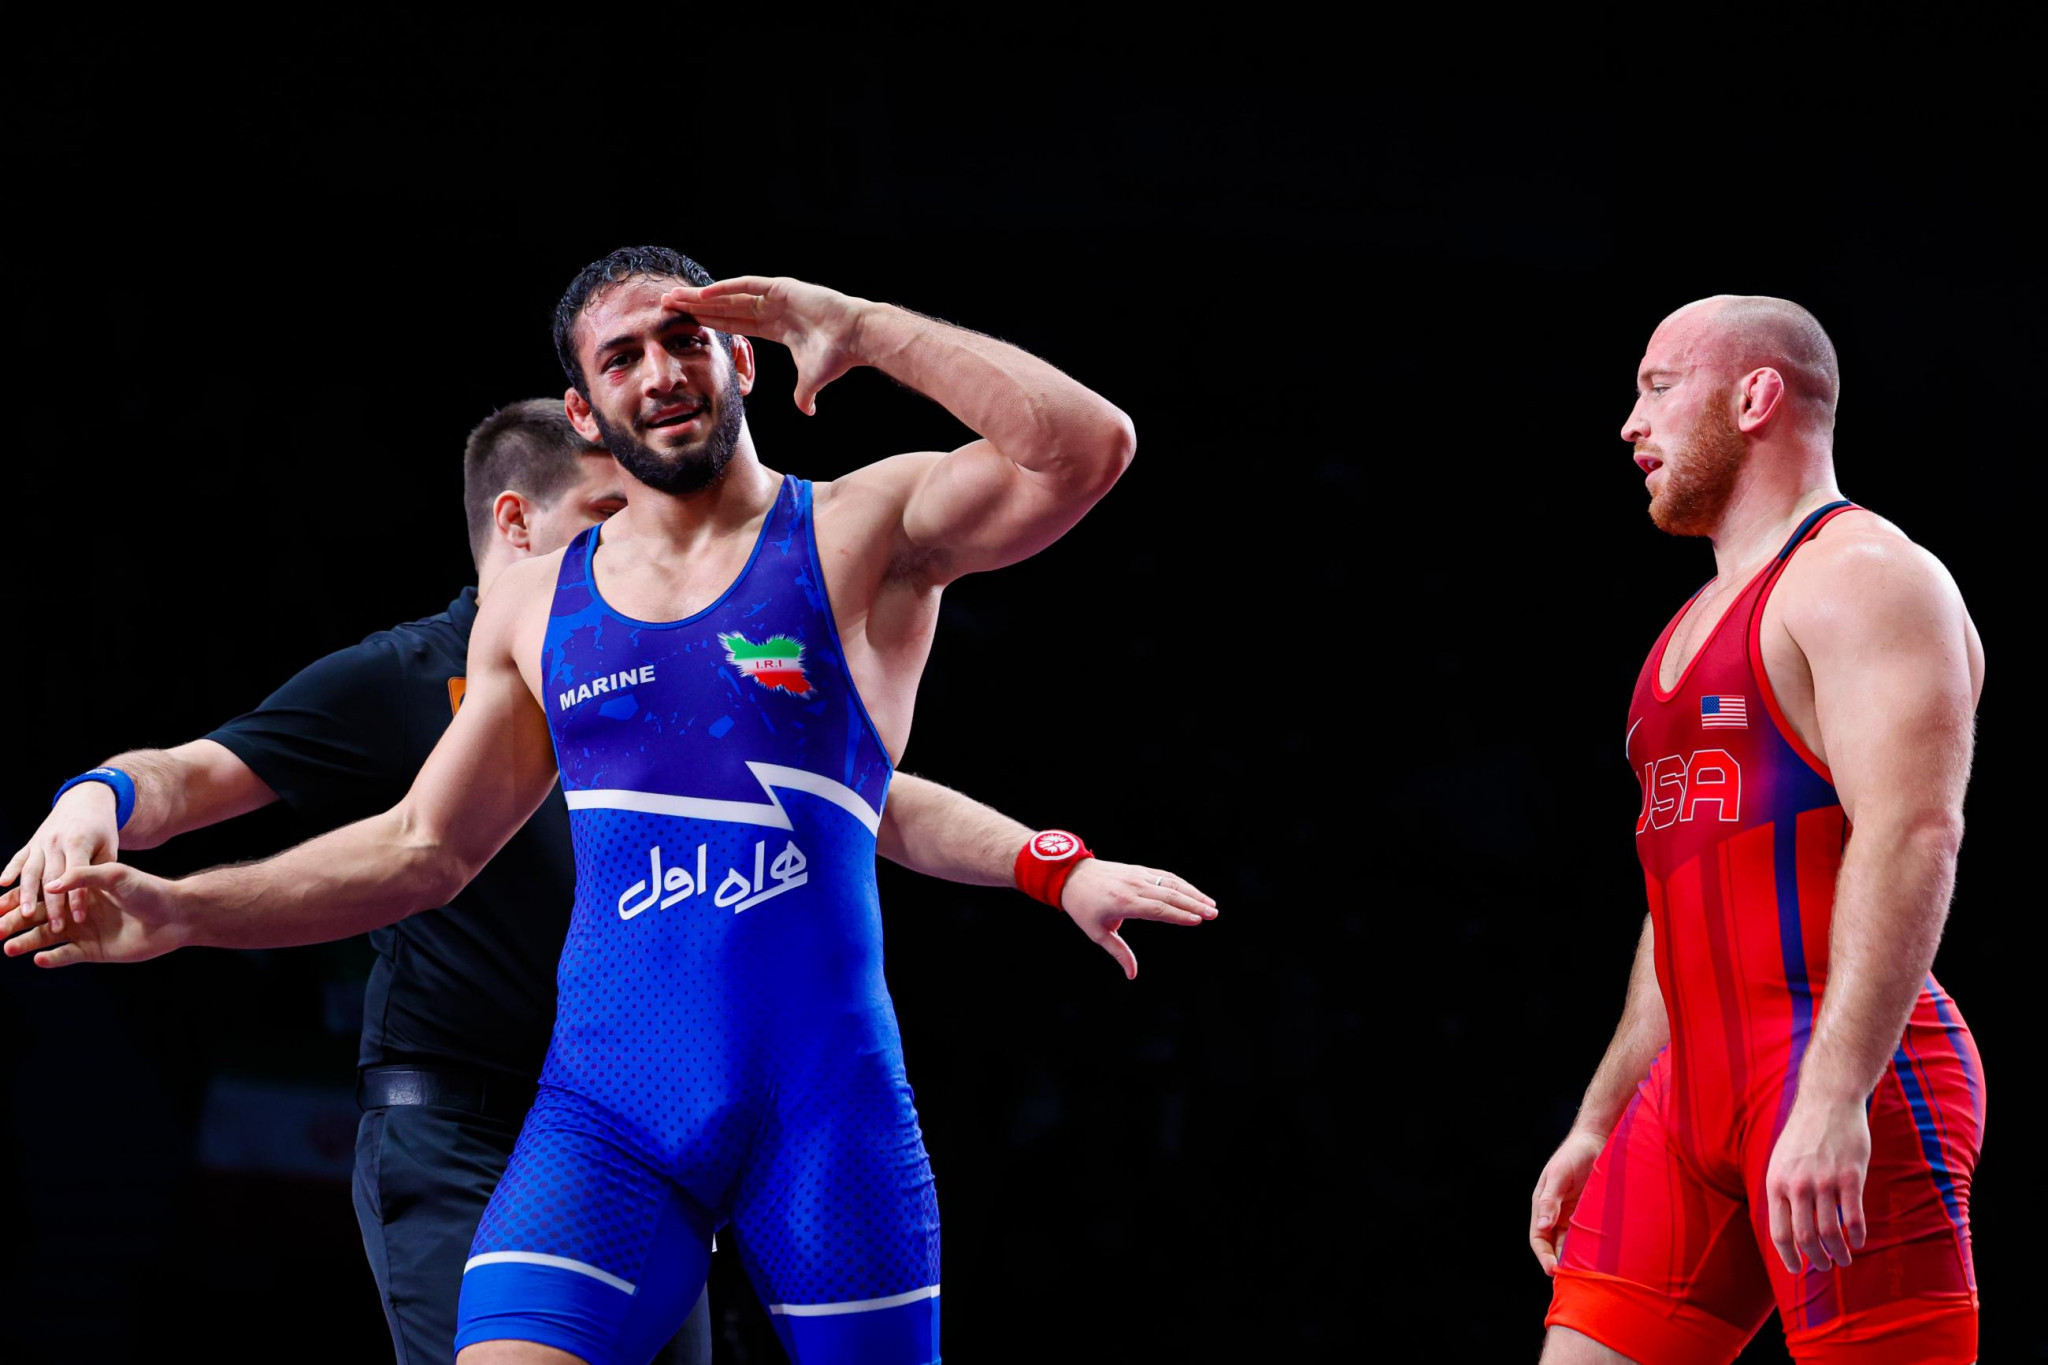 Amirali Azarpira of Iran after defeating Kyls Snyder of the USA in the men's -97 kg freestyle. UWW